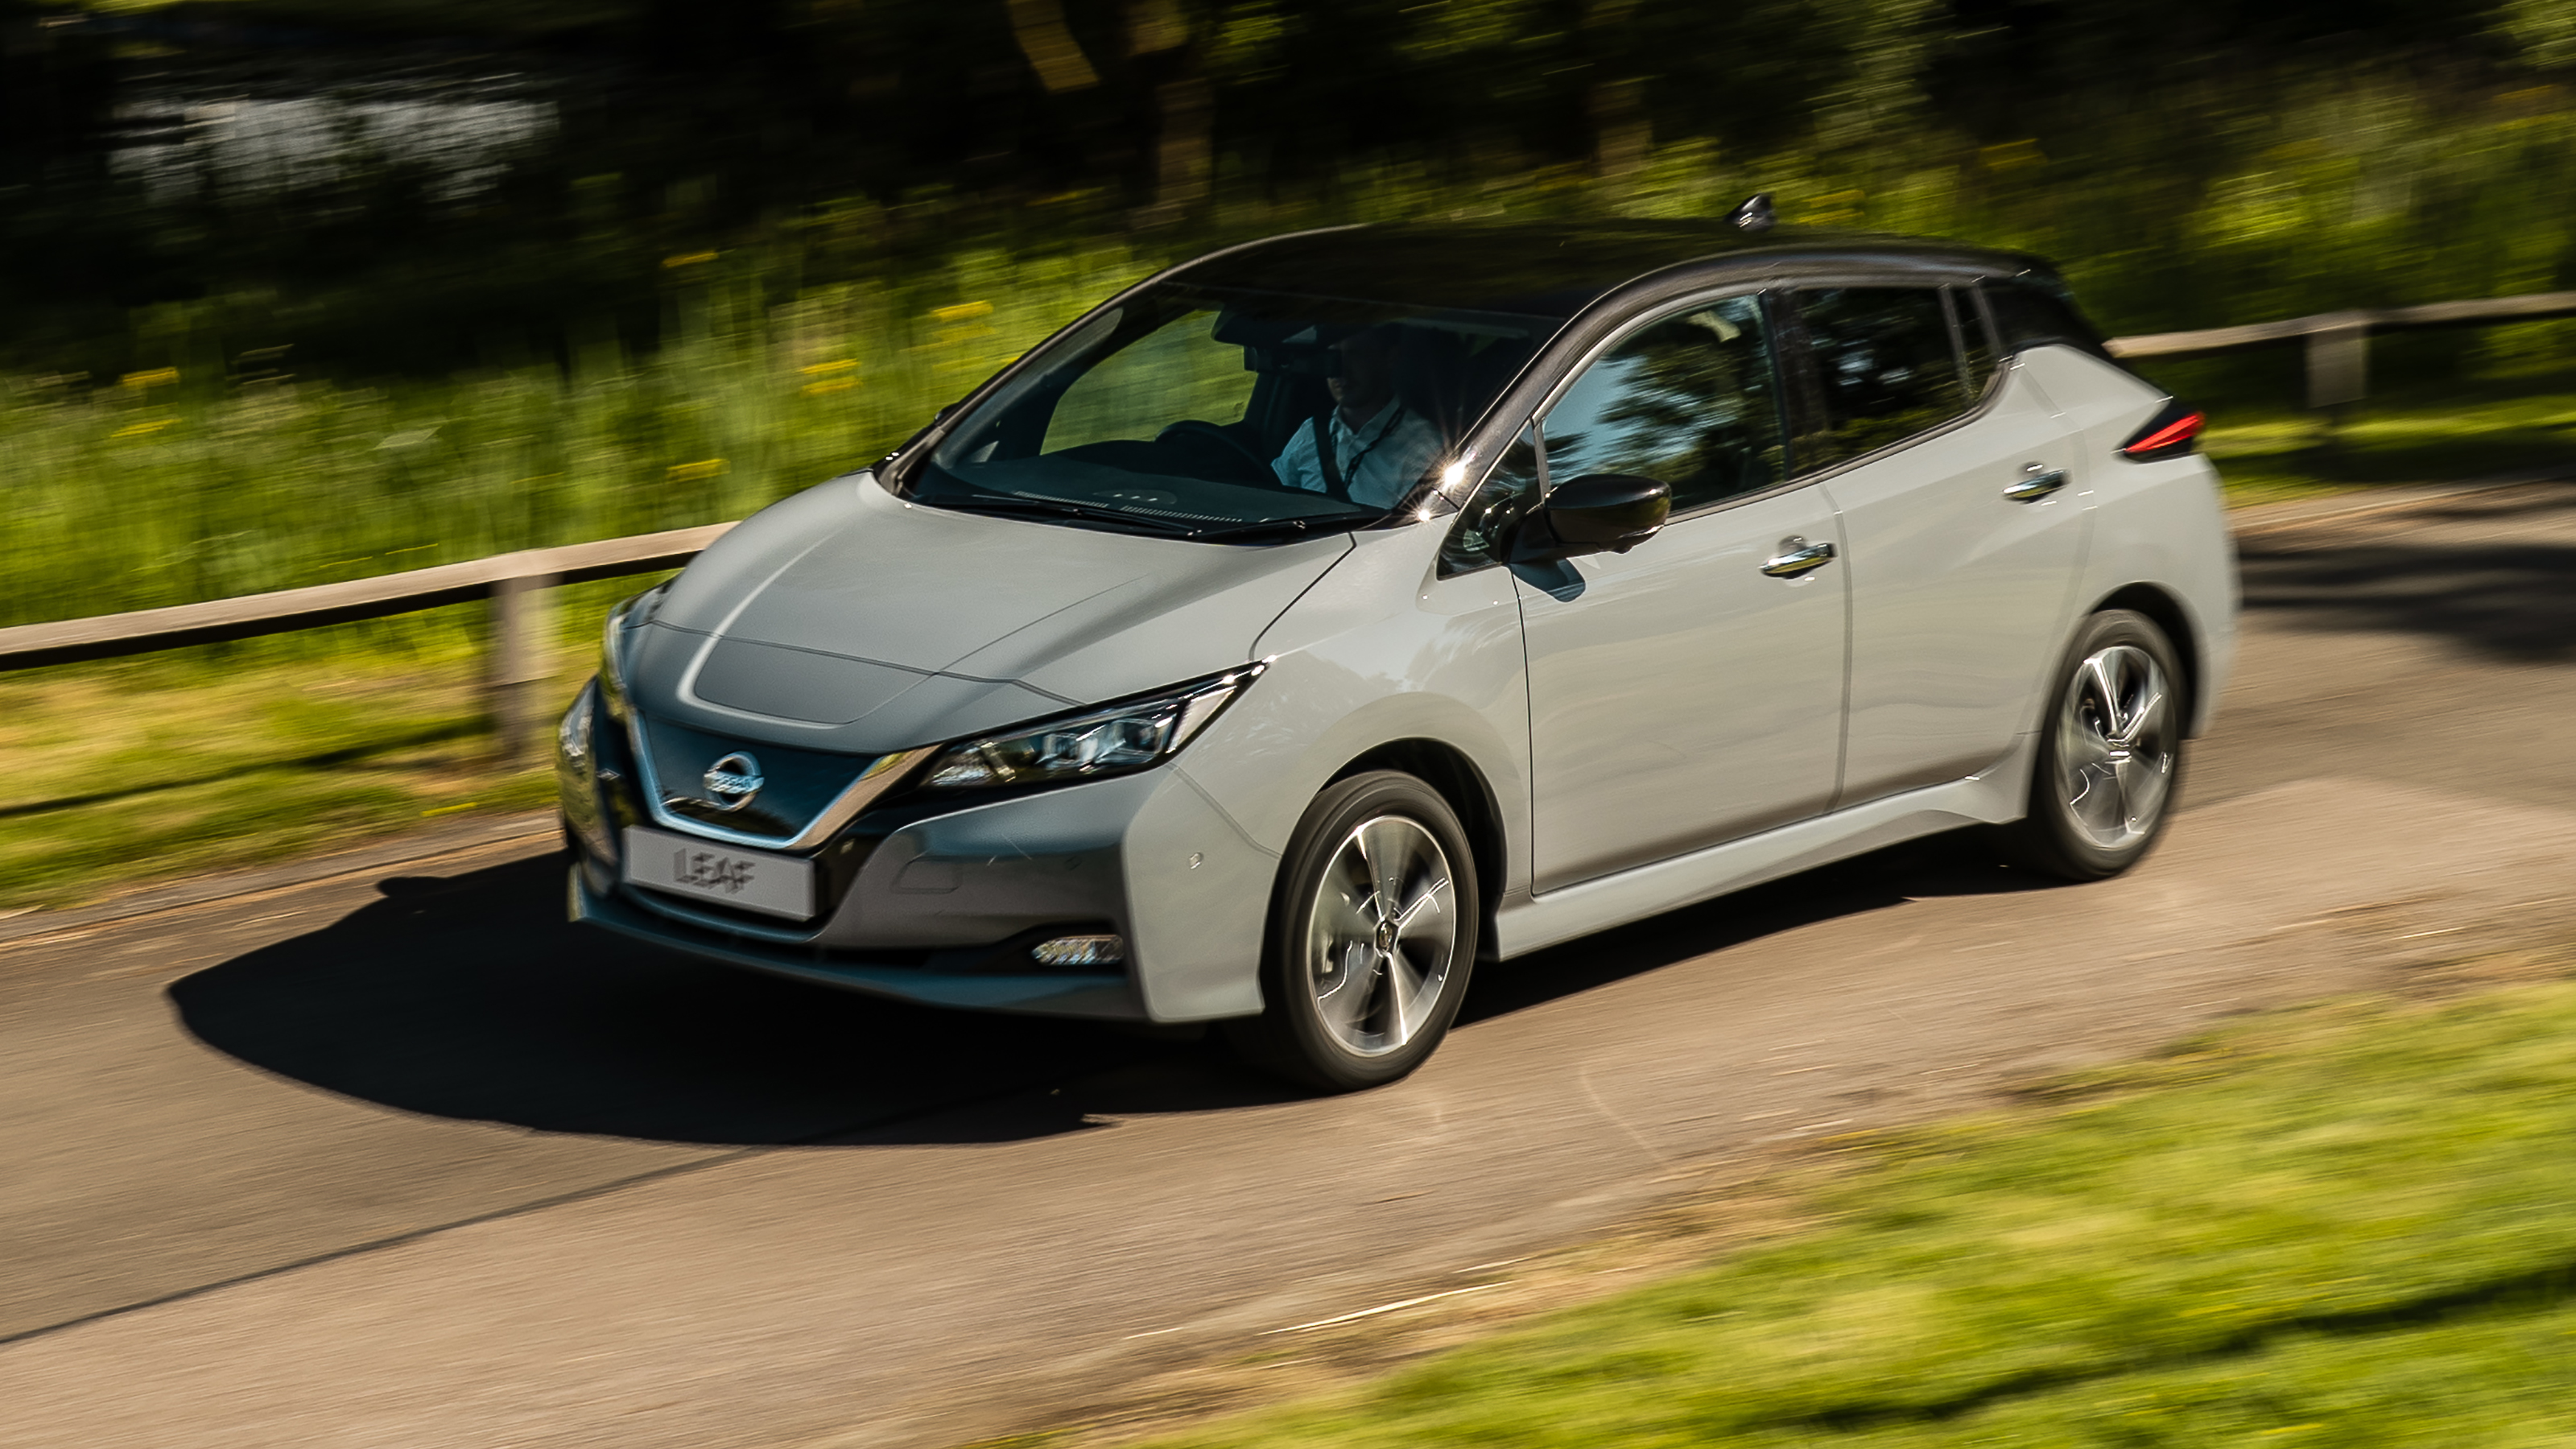 New 2021 Nissan Leaf: prices, specs and pictures | DrivingElectric